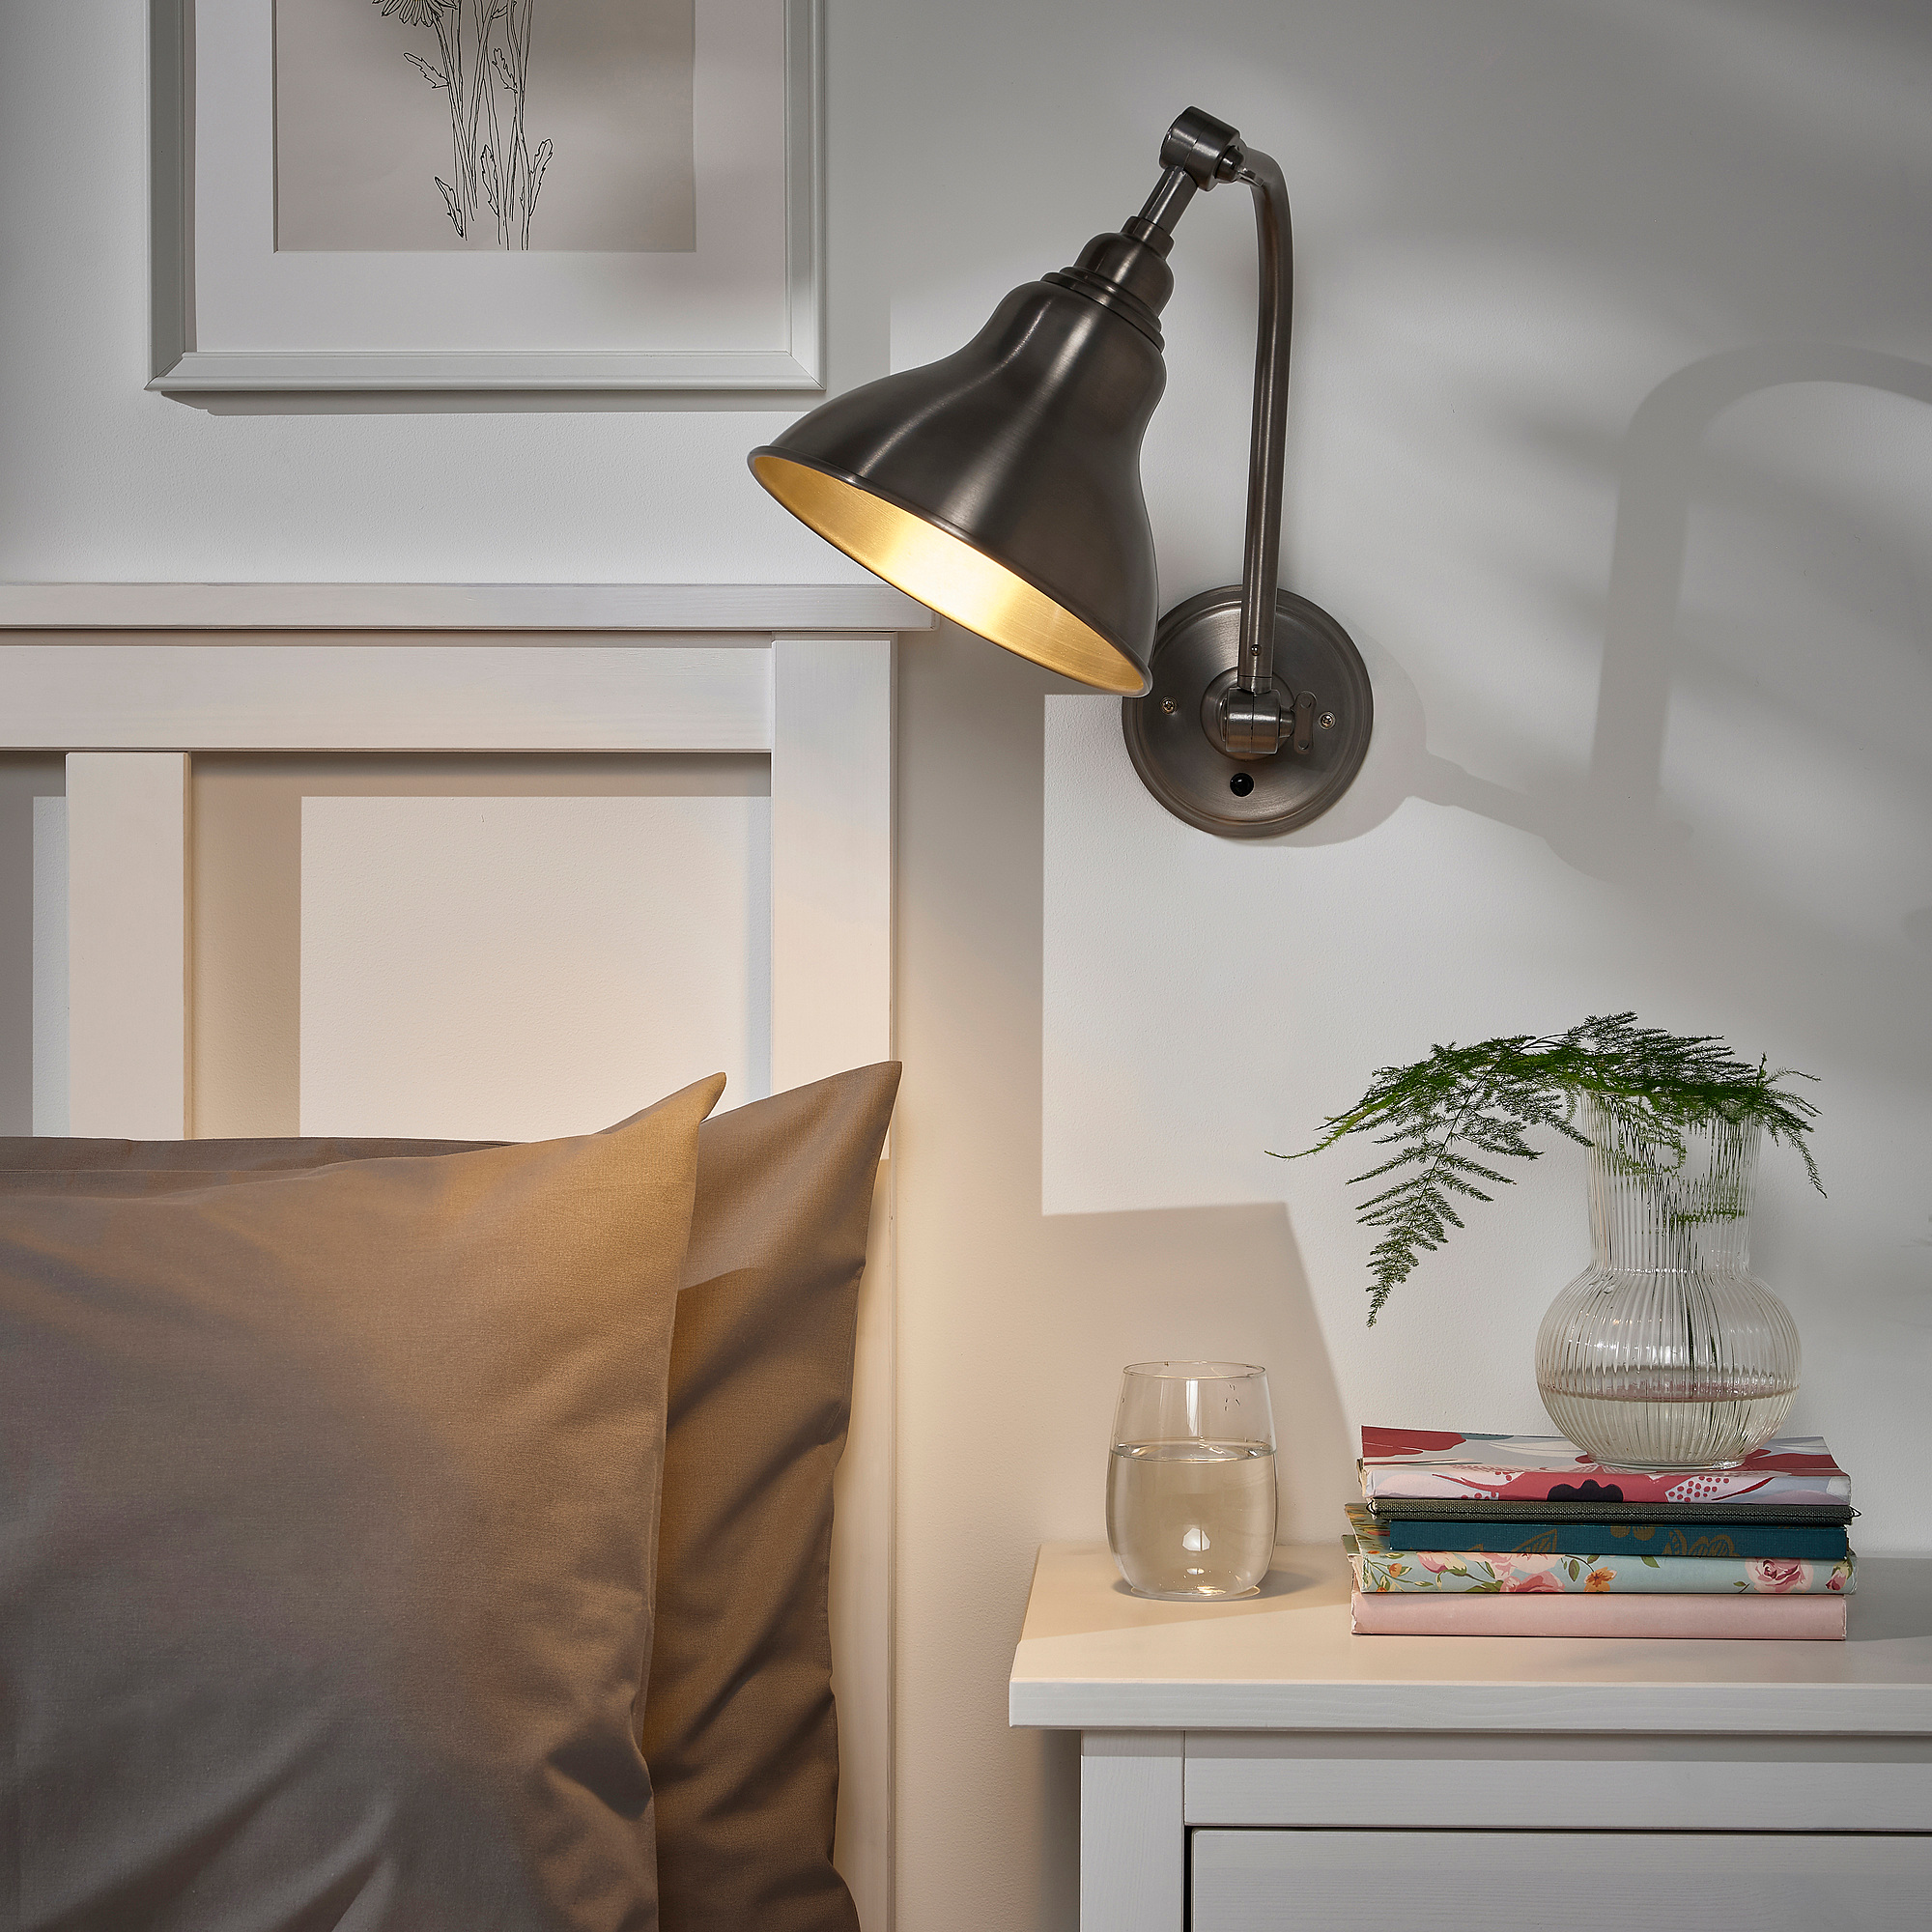 ANKARSPEL wall lamp, wired-in installation